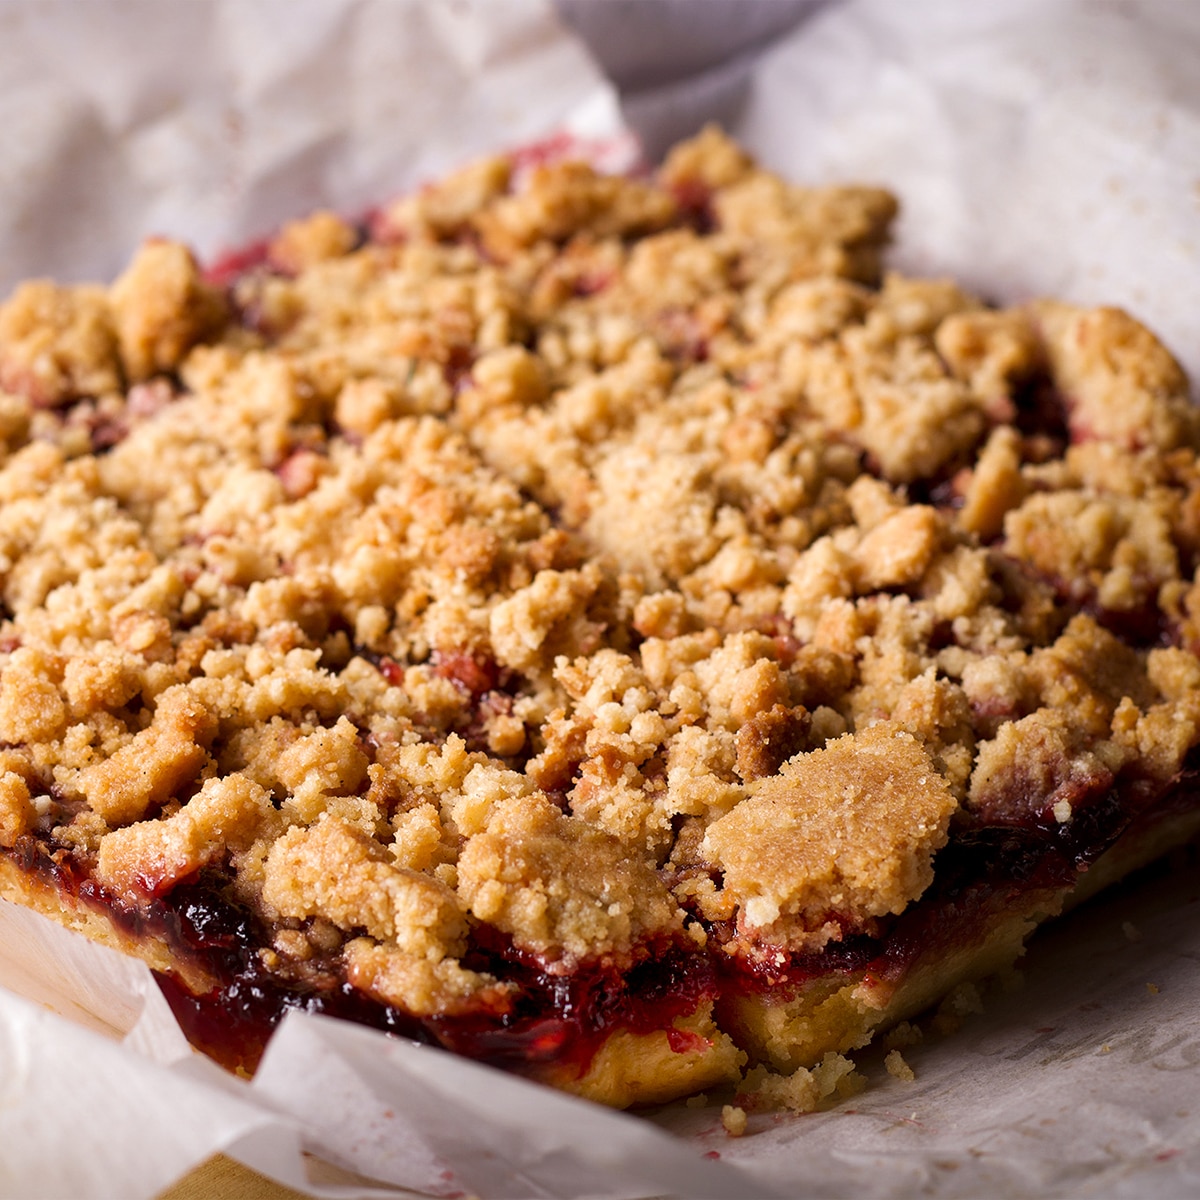 Freshly baked cherry bars with a crumble topping that have just been removed from their baking dish.